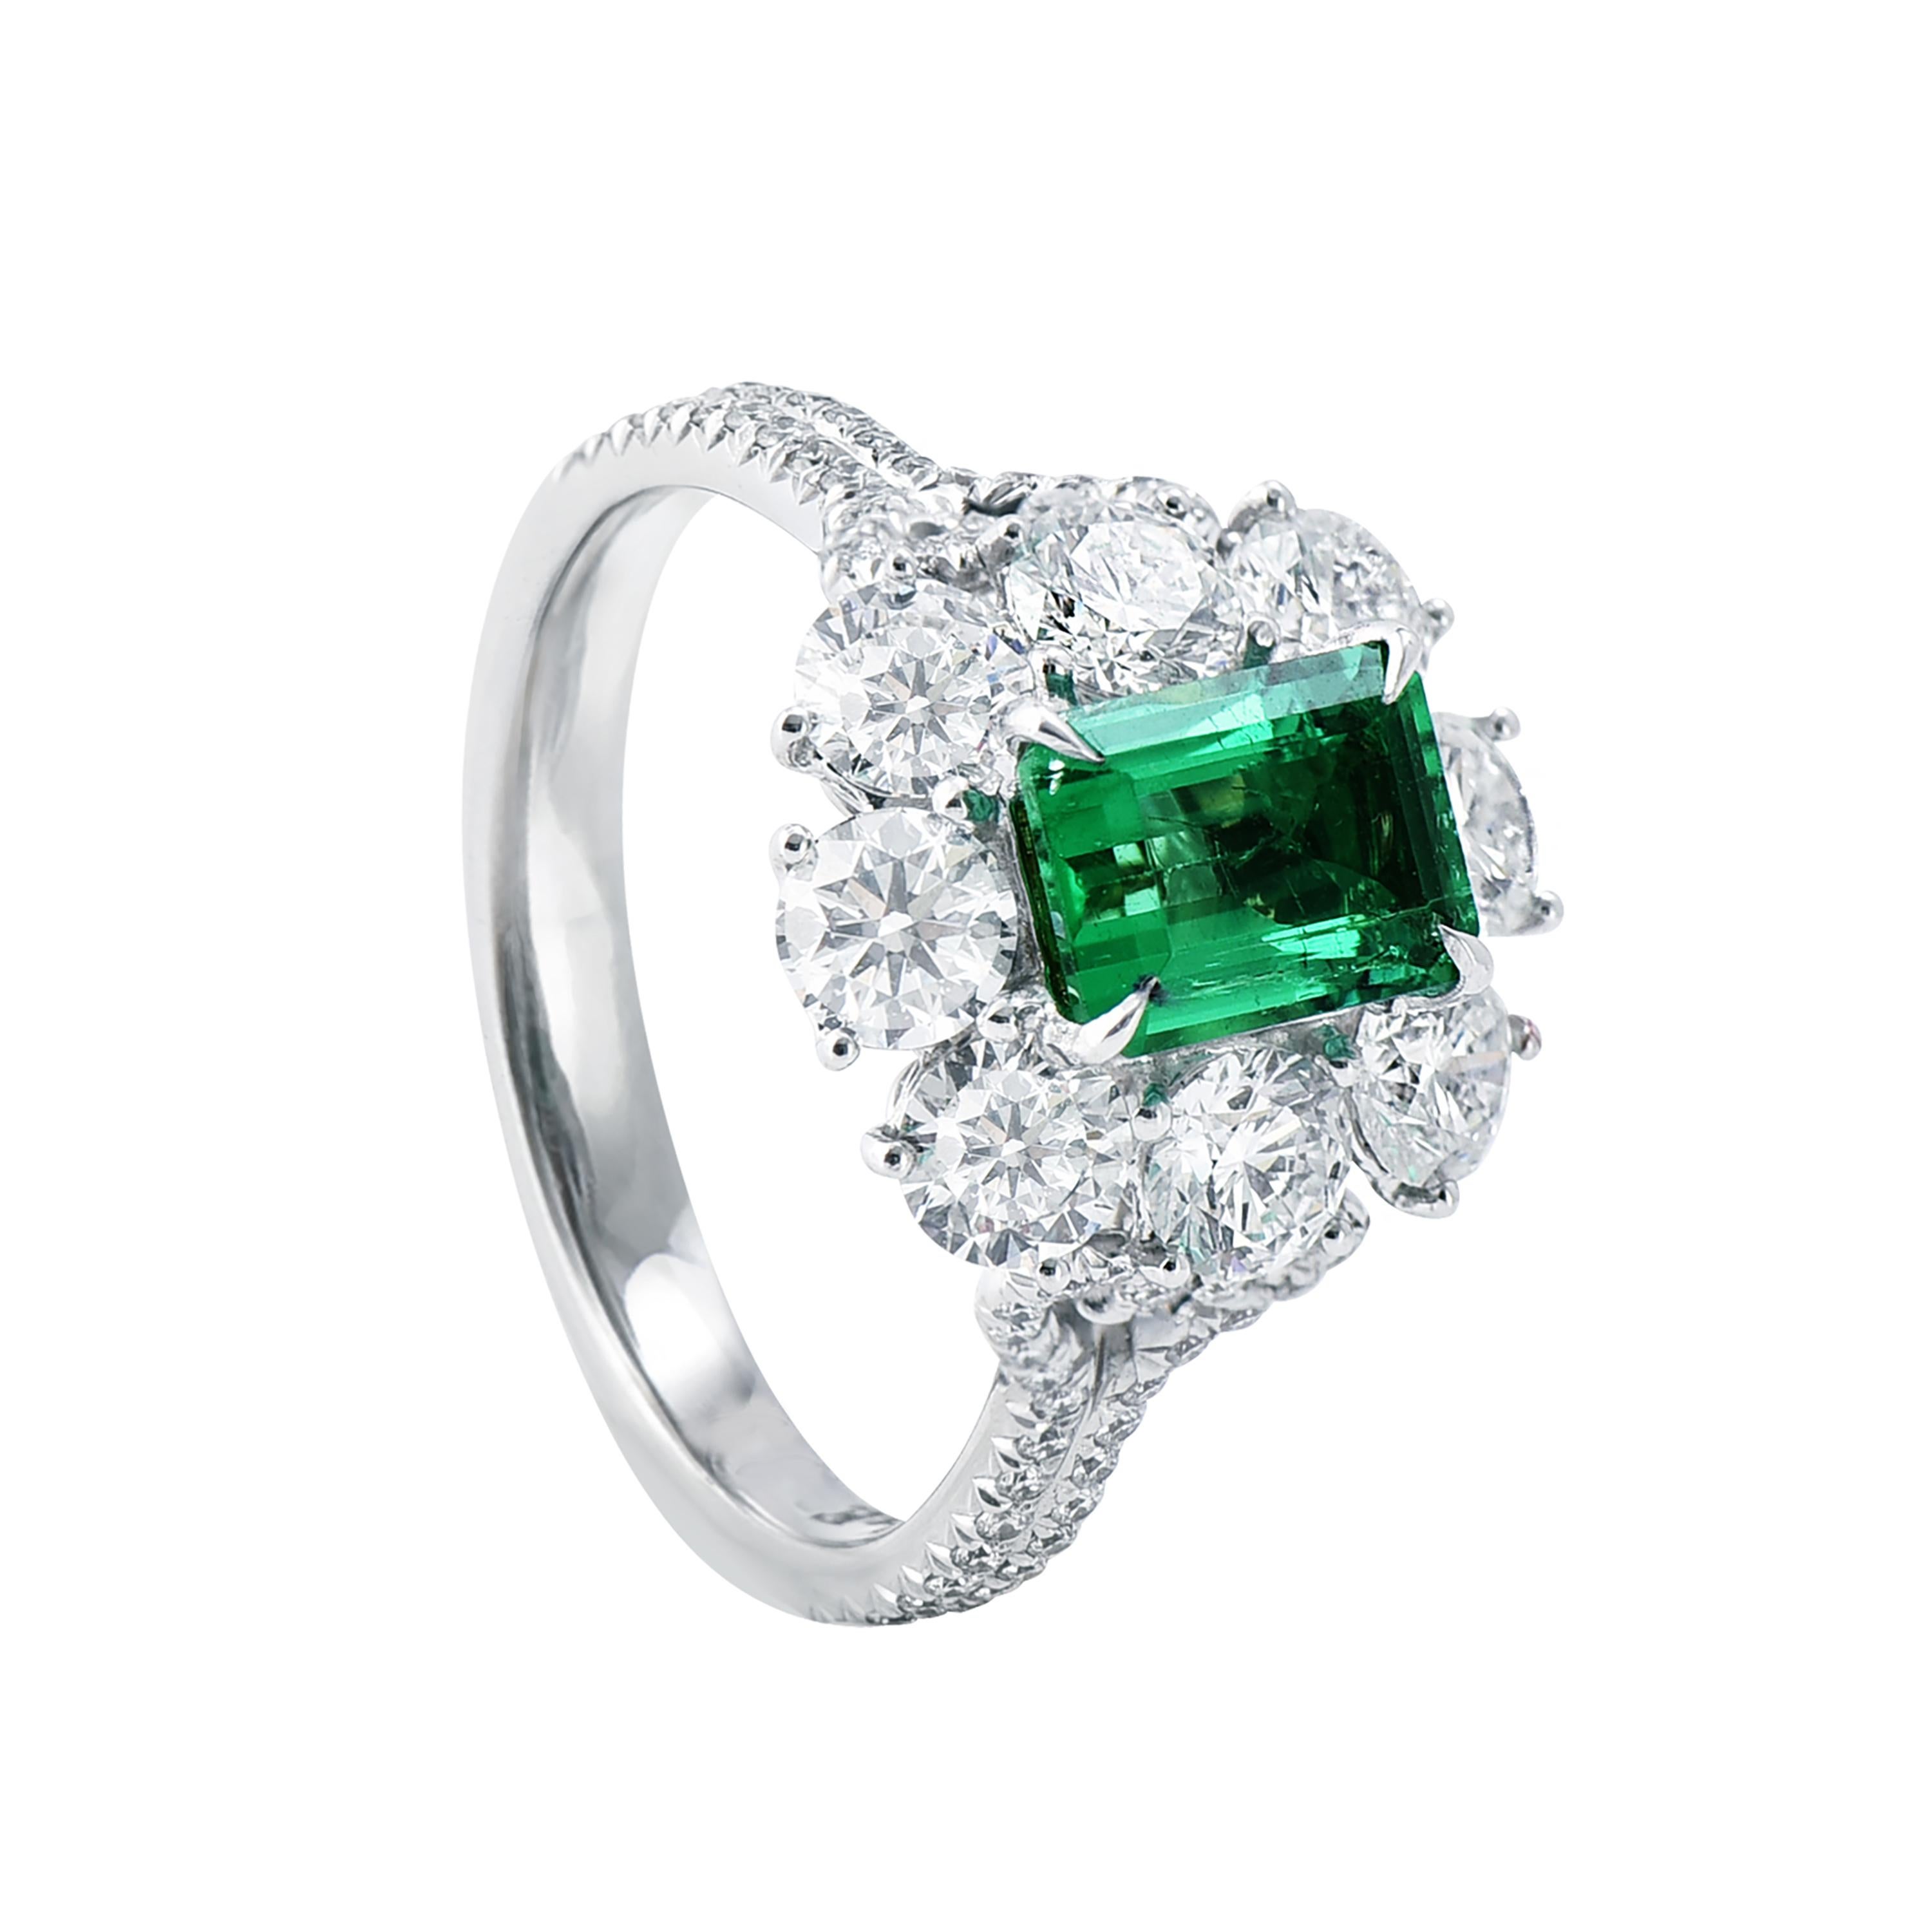 18 karat white gold emerald ring from the Viridian collection of Laviere. The ring, certified by IGI, is set with 1.21 carats emerald in the center and surrounded by 2.02 carats round brilliant diamonds. 
Gold Weight 5.66 grams. Diamond Clarity